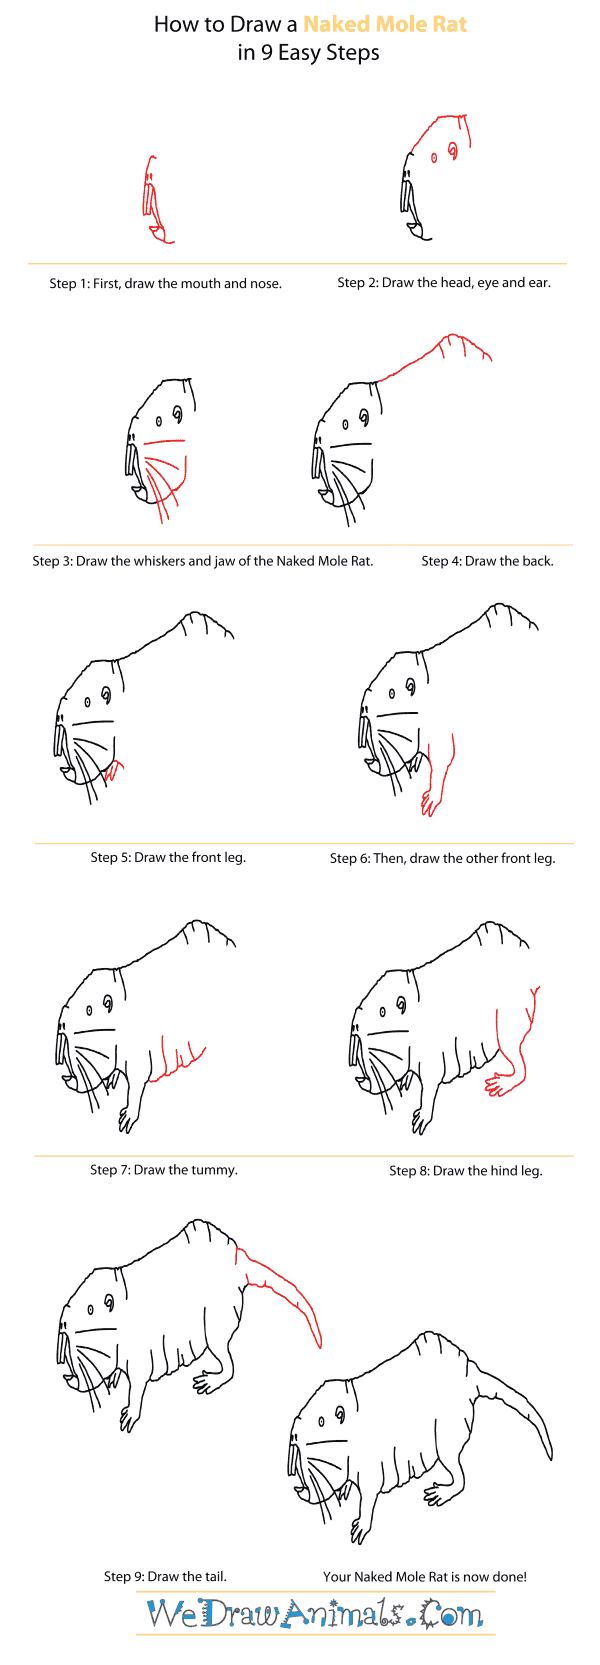 How to Draw a Naked Mole Rat - Step-By-Step Tutorial